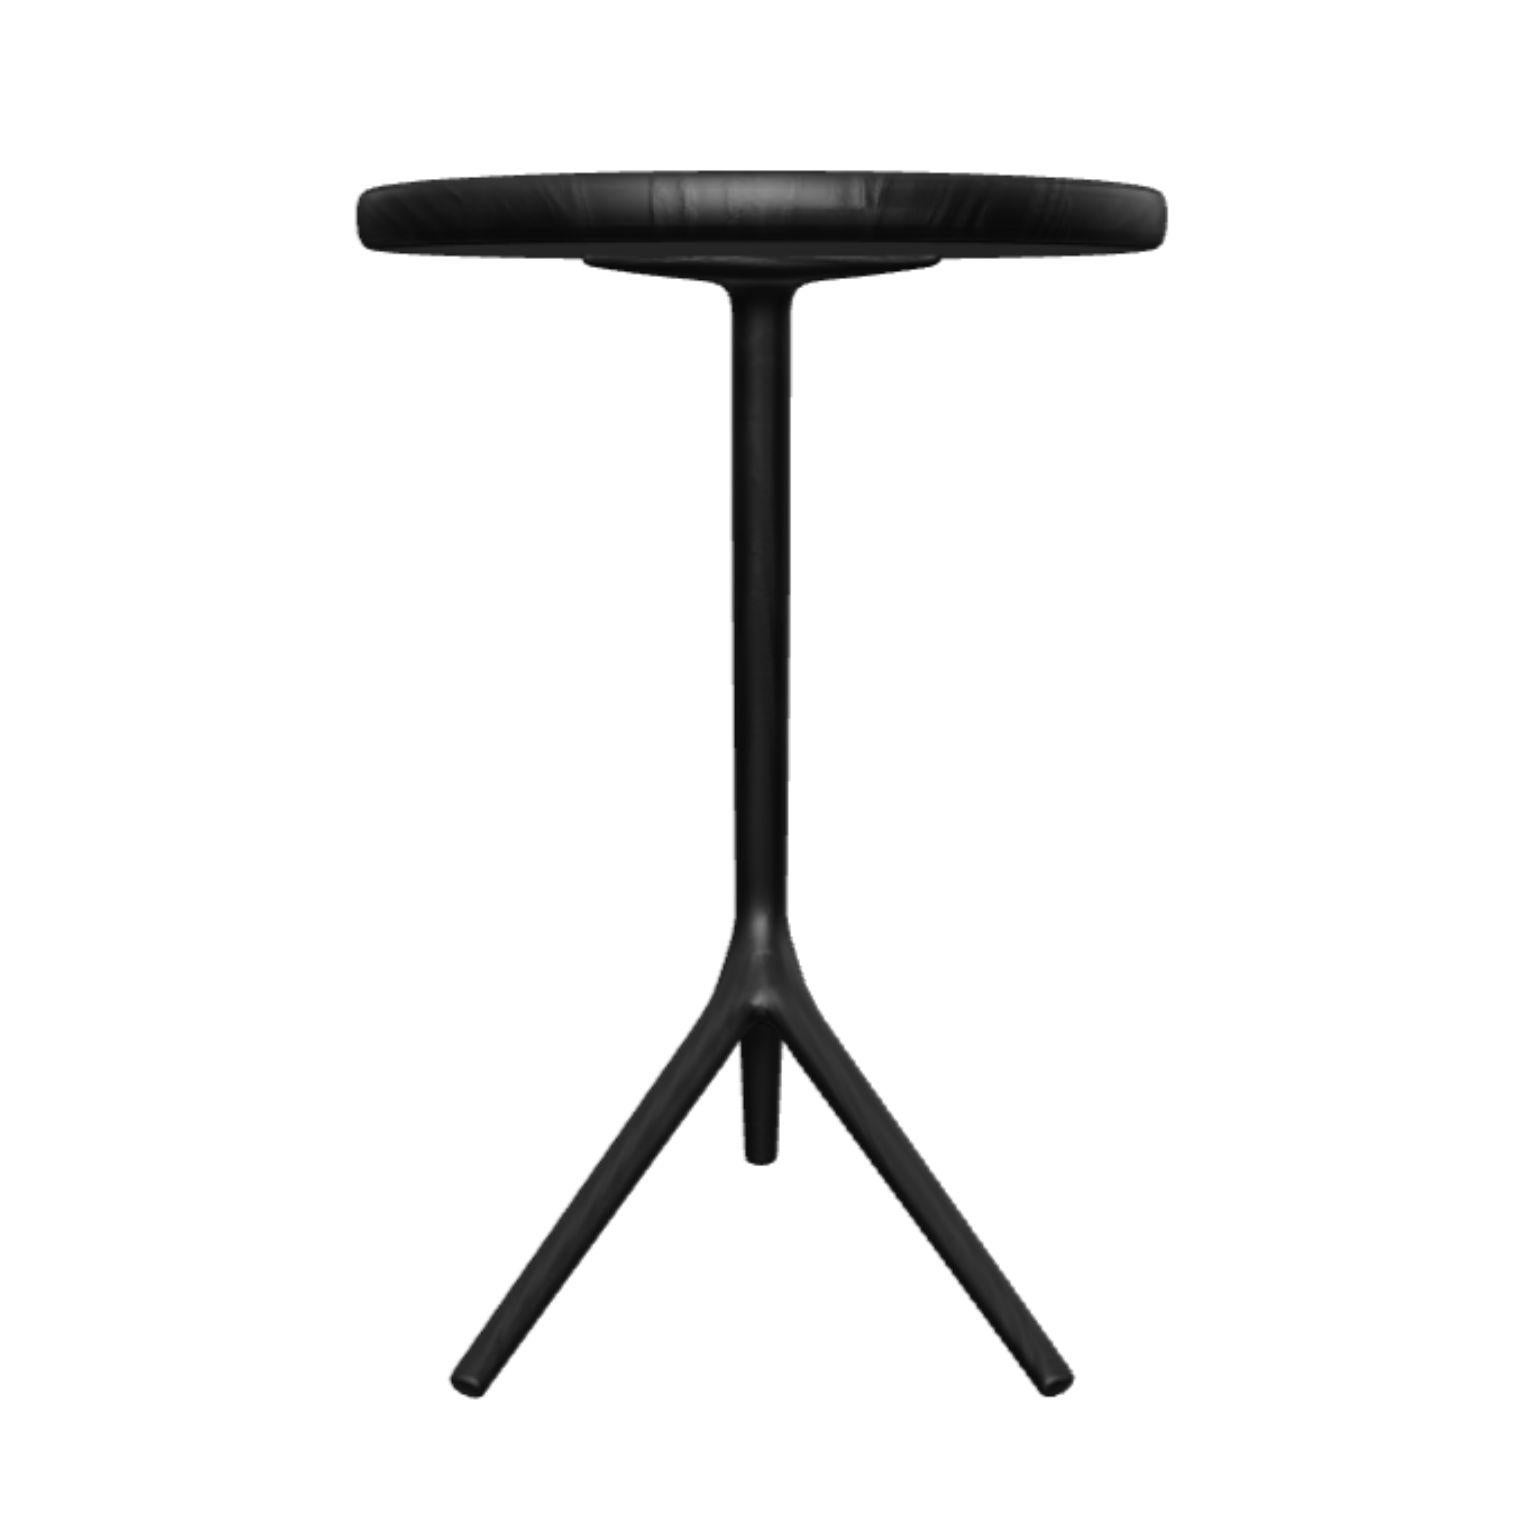 Ash Short tripod table by Fernweh Woodworking
Dimensions: Ø 40.7 x H 50.8 cm 
Materials: Charcoal ash 

Different size and wood options available. 
Size options: 
Short: Ø 40.7 x H 50.8 cm 
Medium: Ø 40.7 x H 57.2 cm 
Tall: Ø 40.7 x H 63.5 cm
Wood